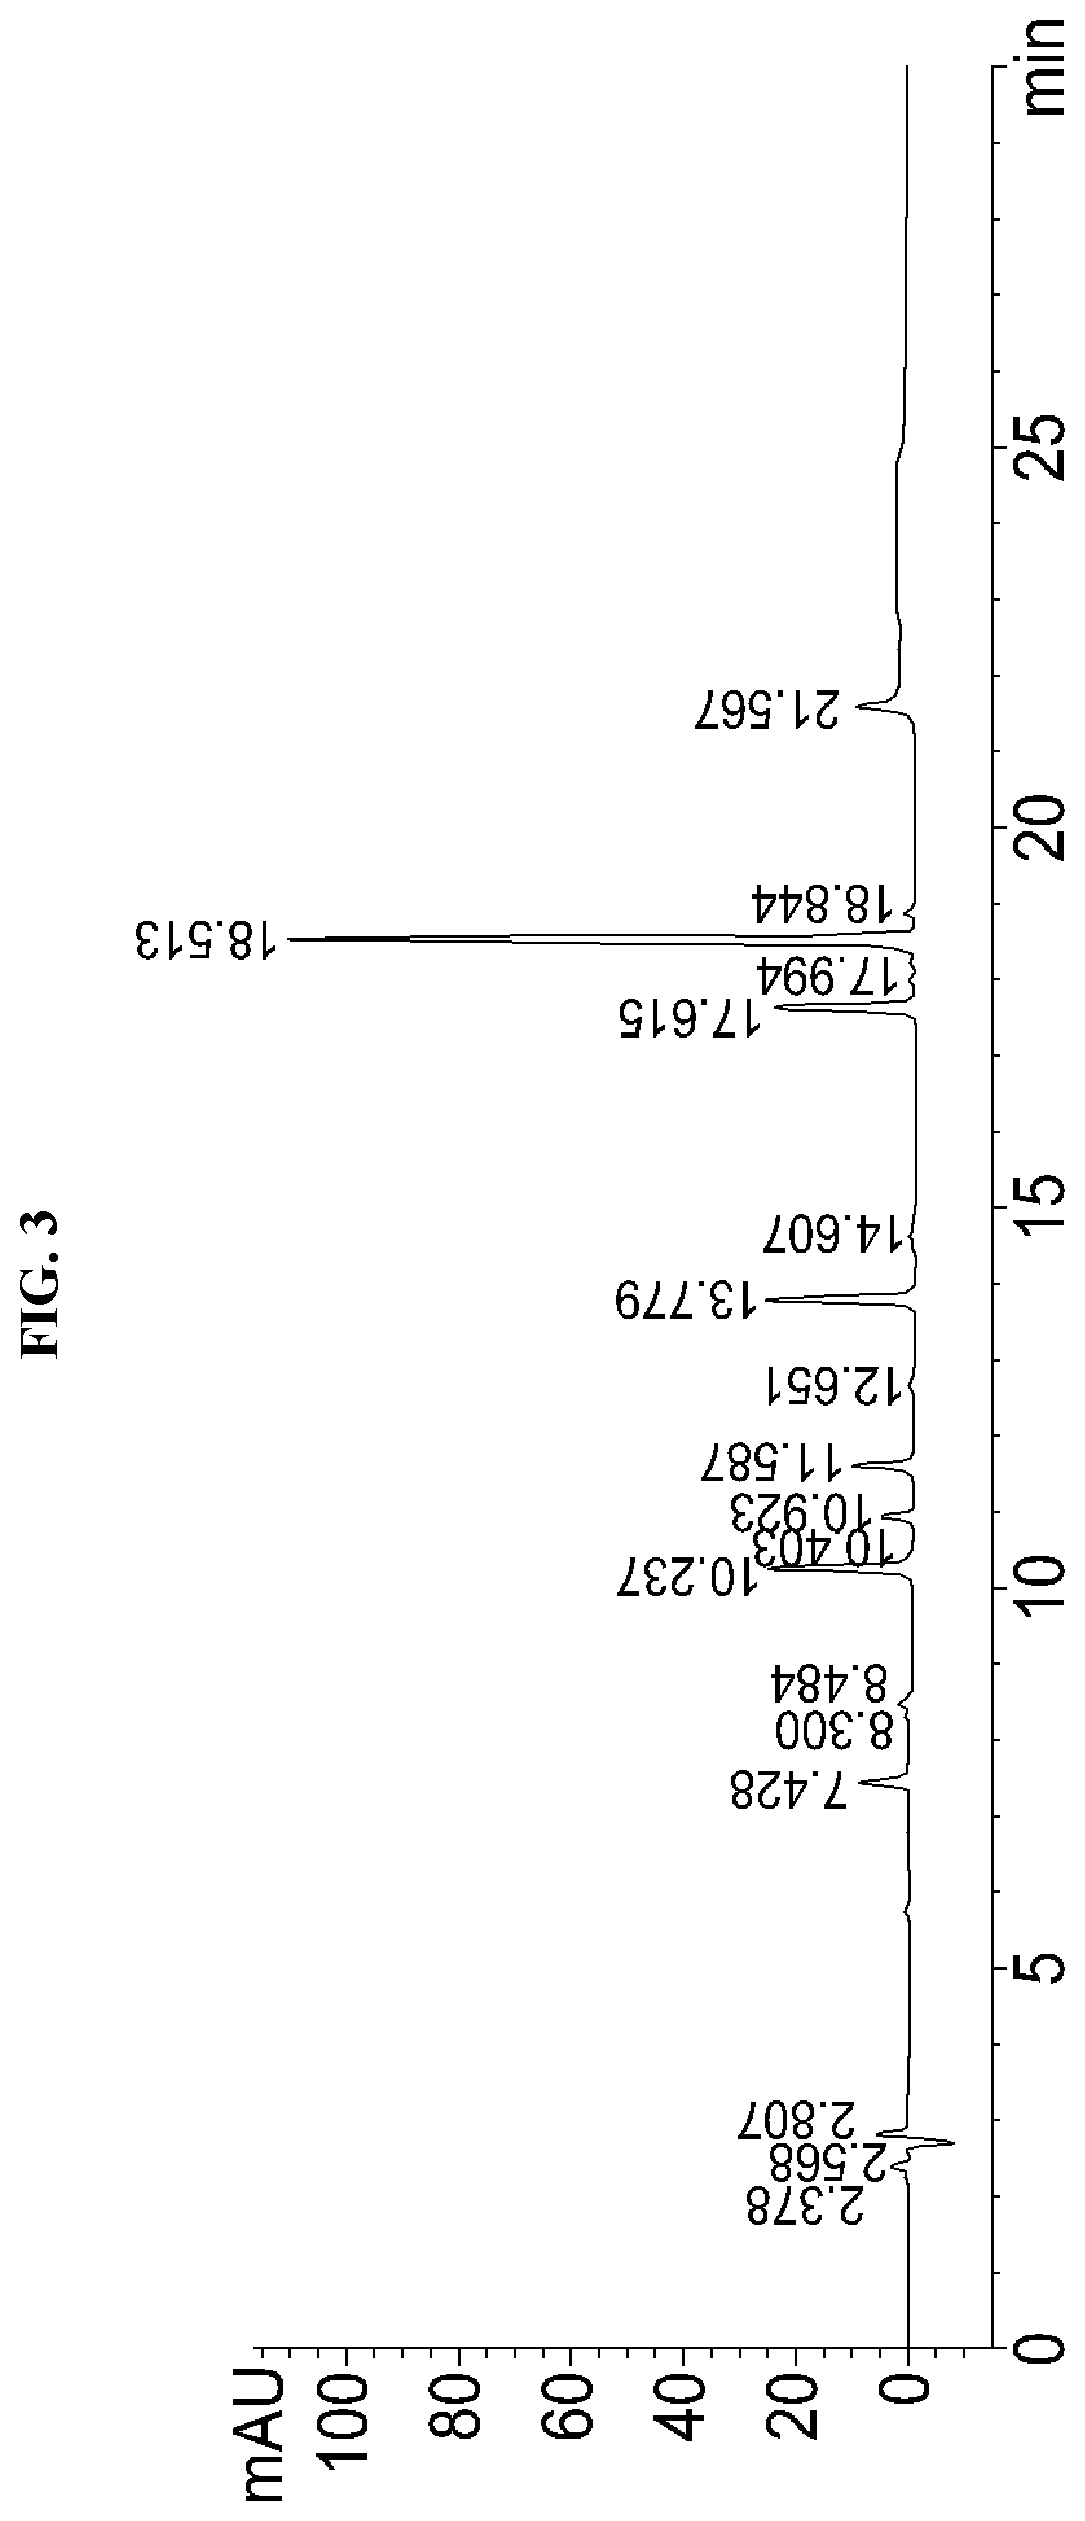 Method for long-term storage of chlorophyll-containing extract